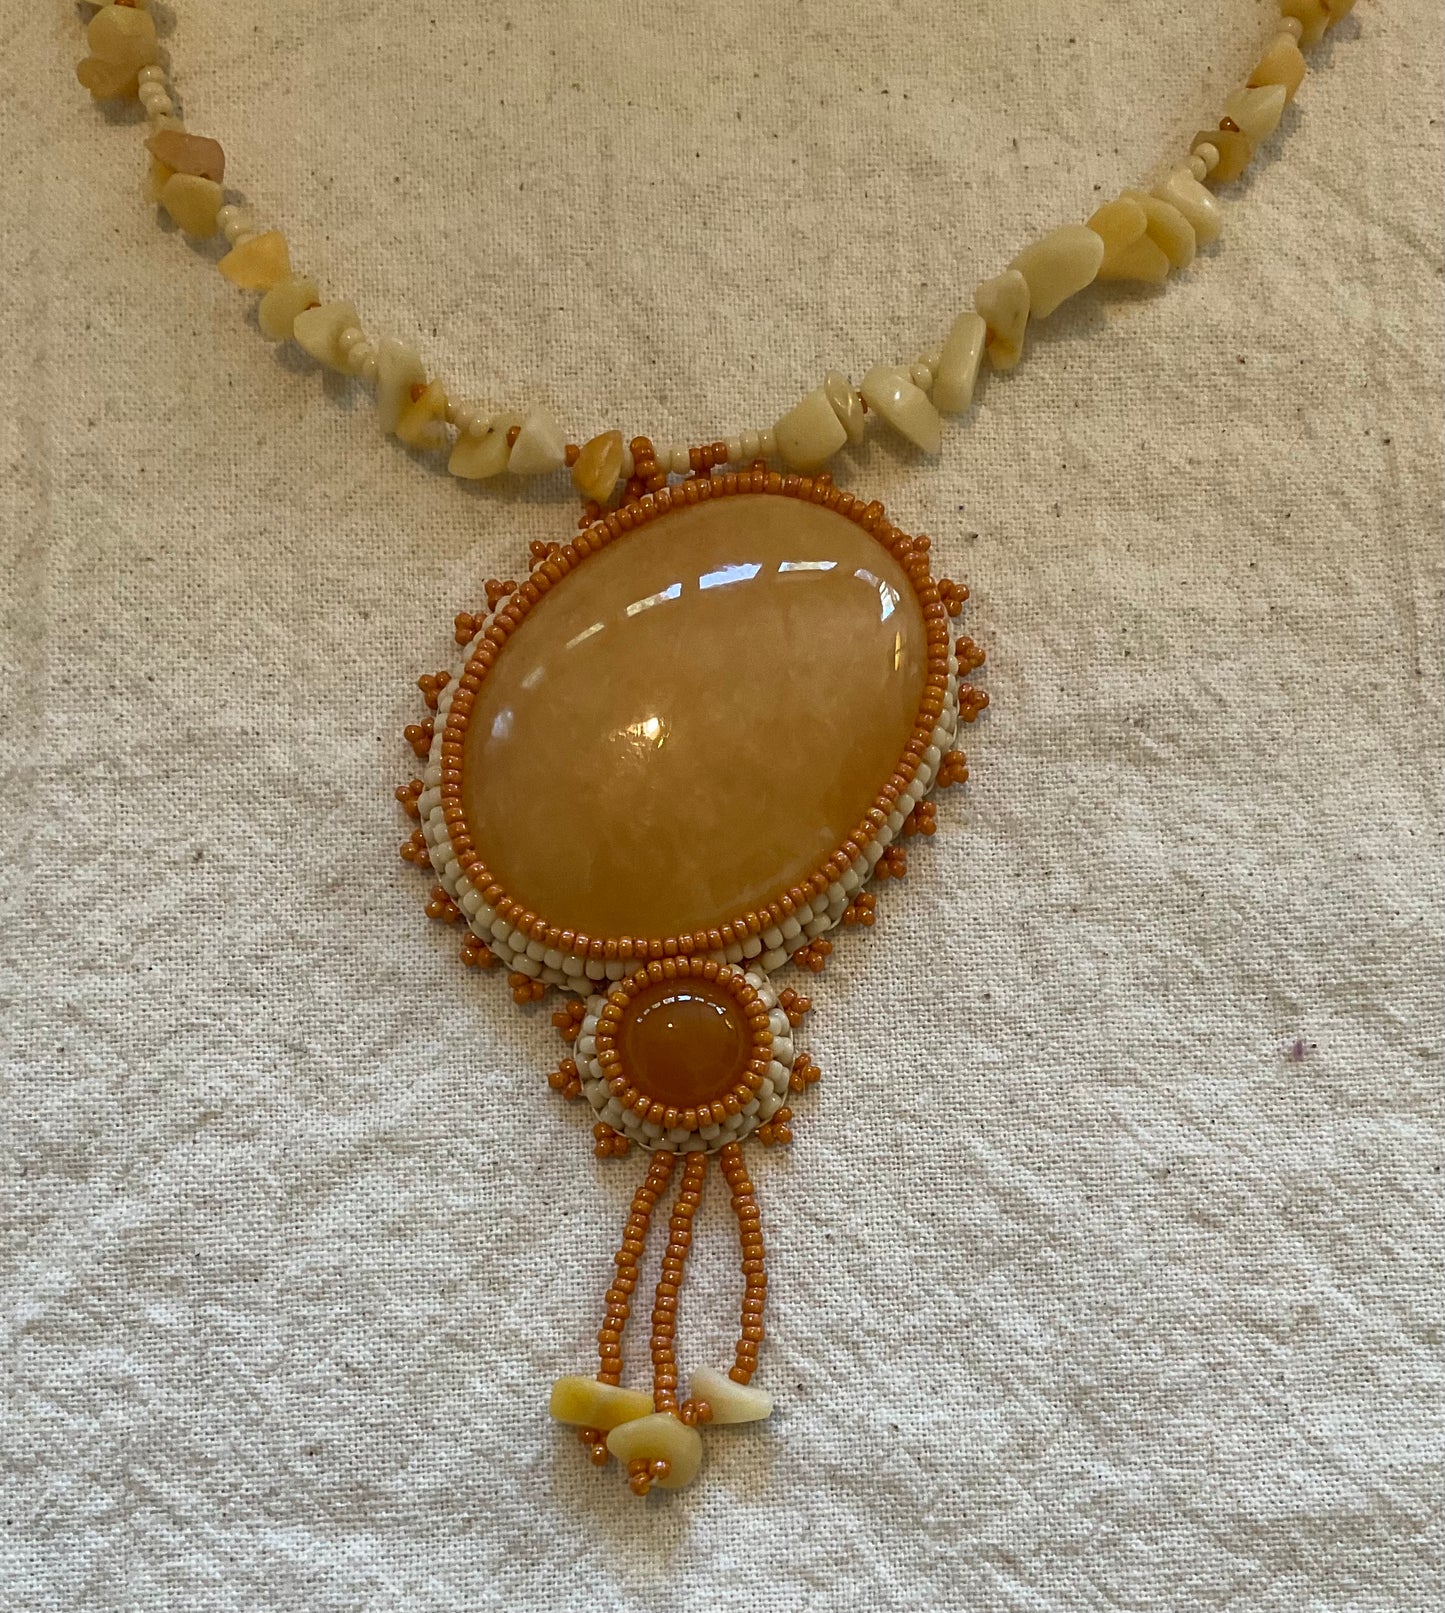 Golden Jade & Amber Bead Embroidered Cabochon Necklace with Fringe